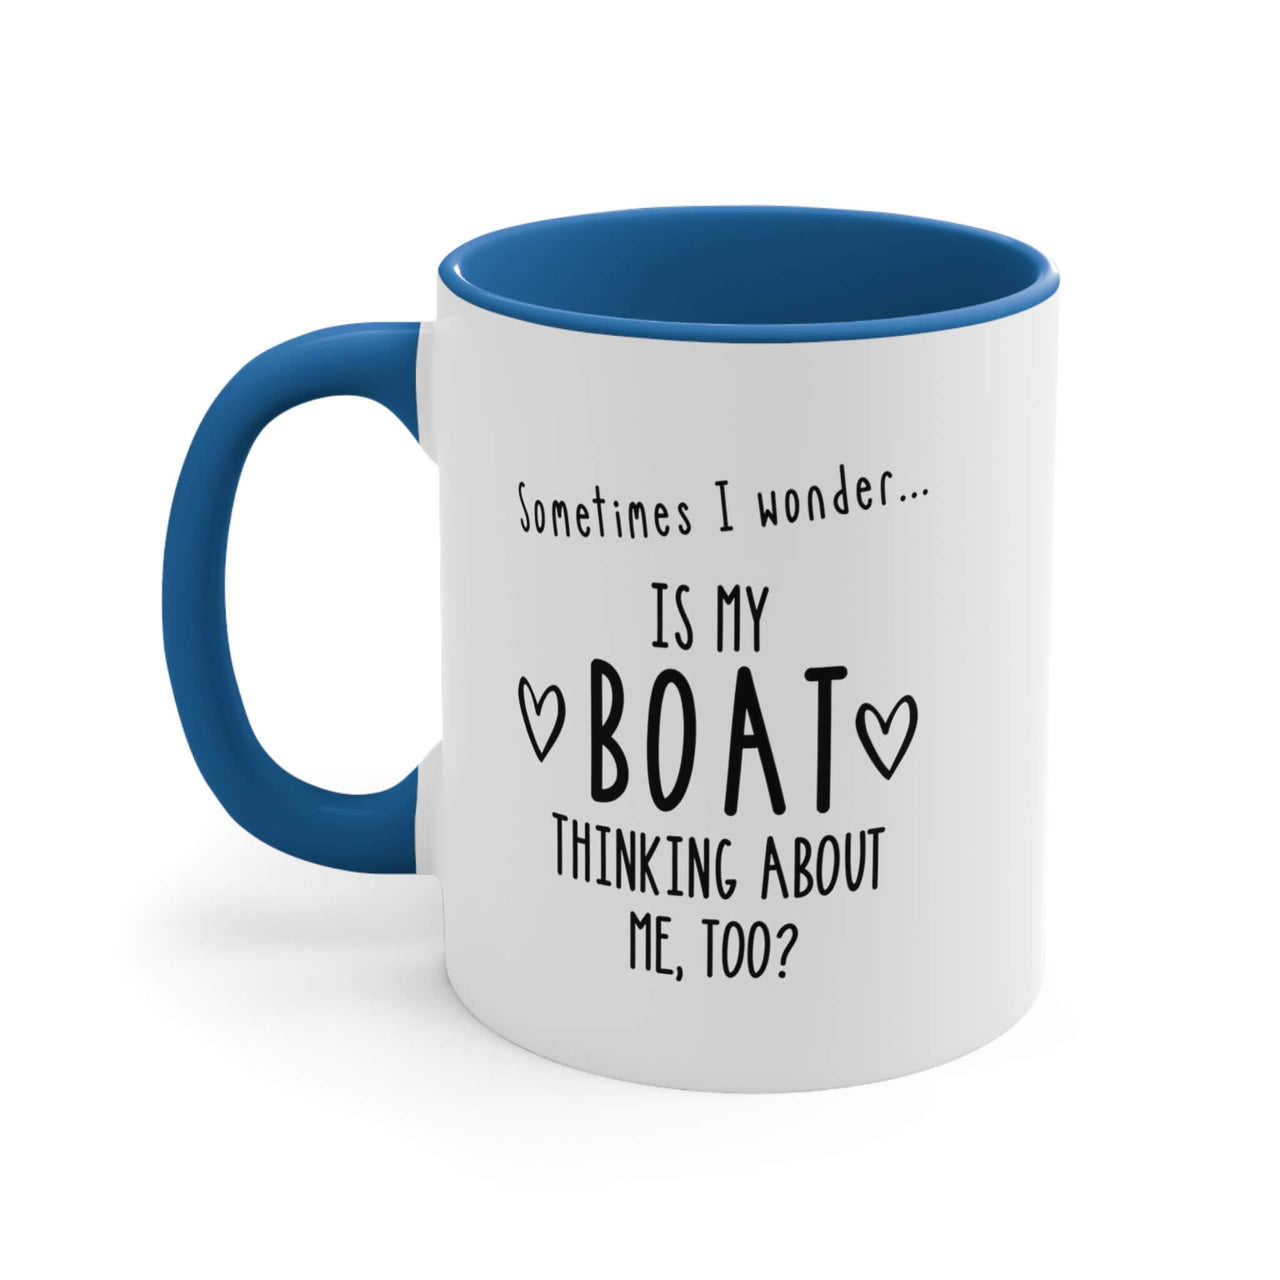 Is My Boat Thinking About Me Too Ceramic Coffee Mug, 5 Colors Mugs New England Trading Co Light Blue  